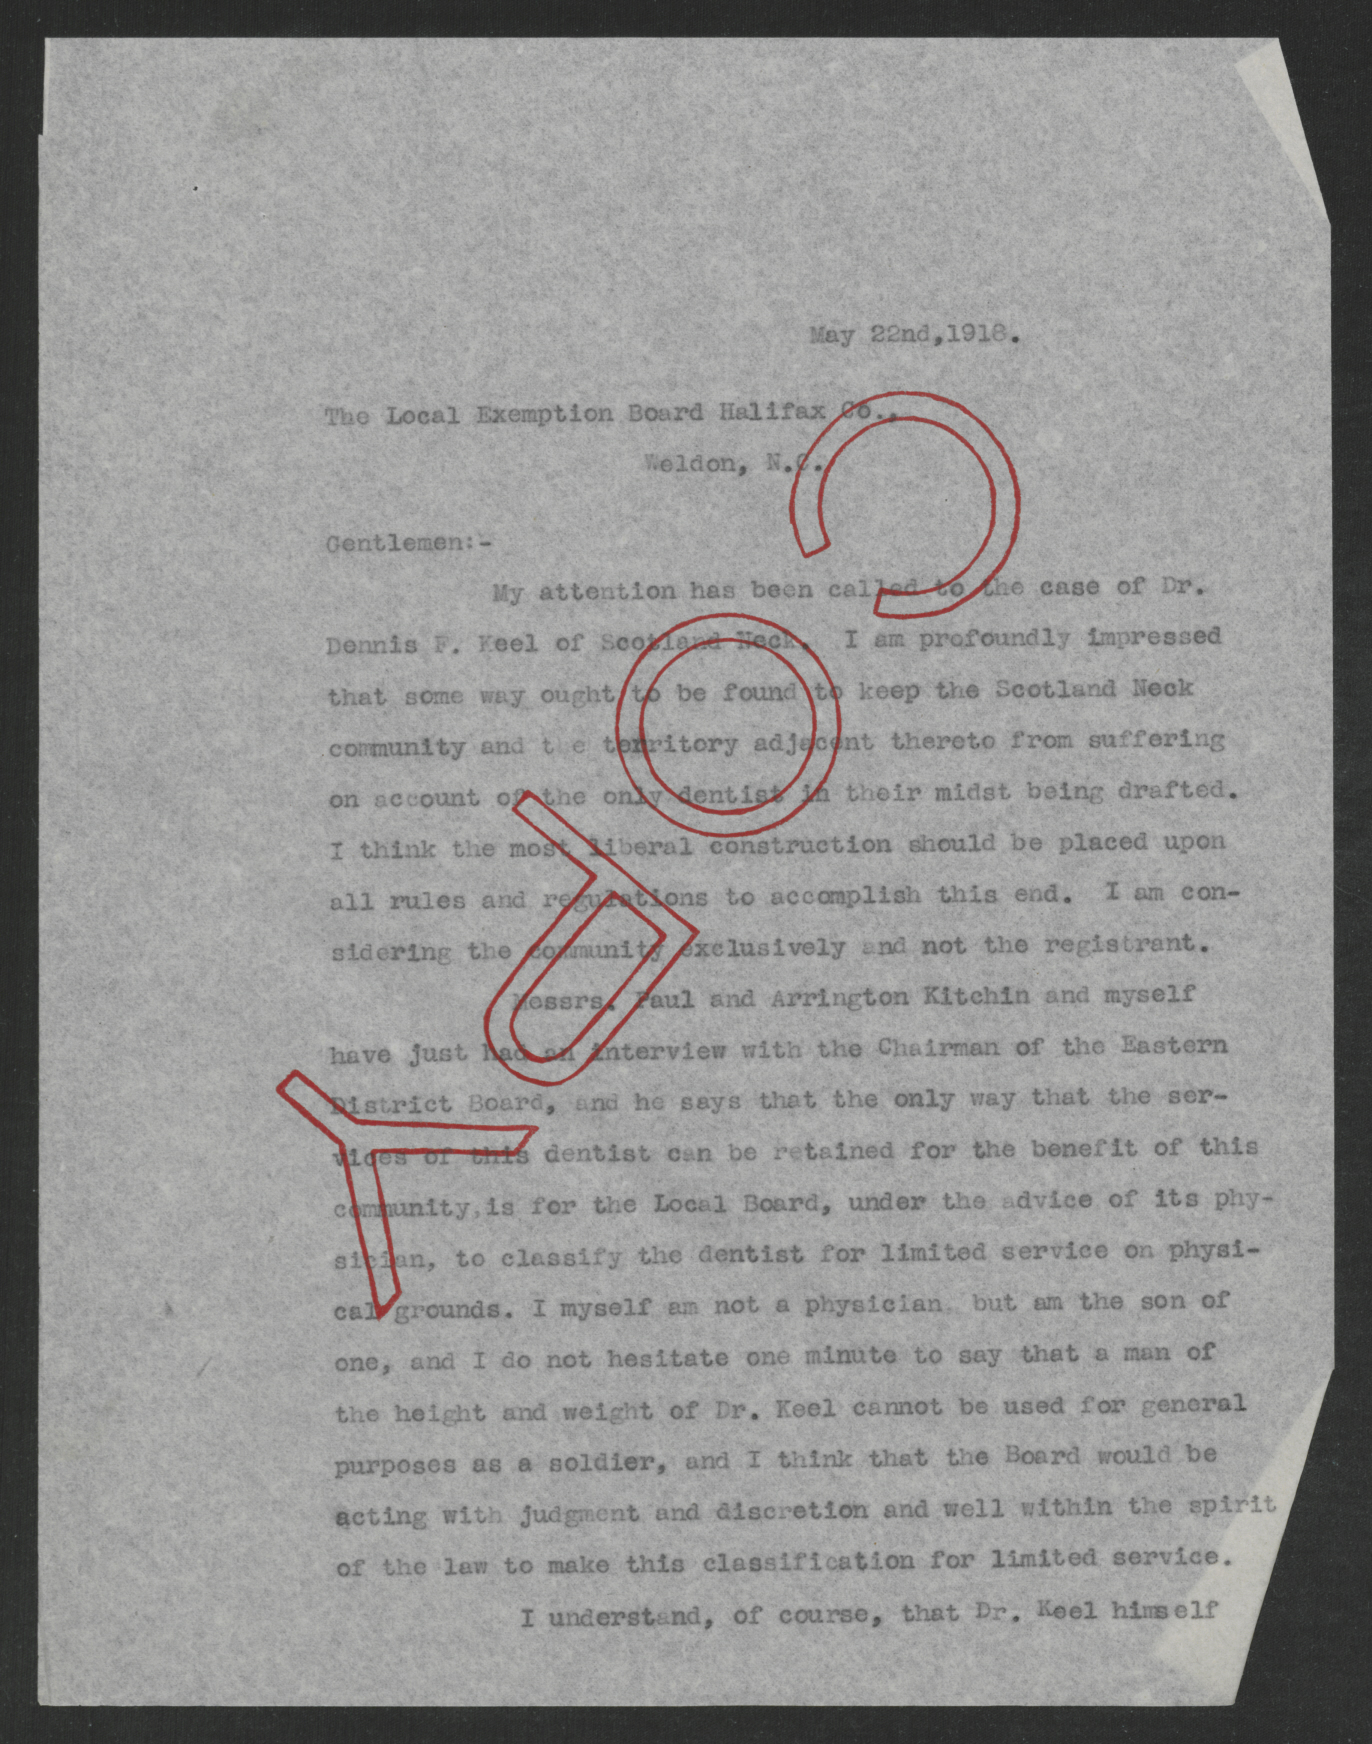 Letter from Thomas W. Bickett to the Halifax County Exemption Board, May 22, 1918, page 1